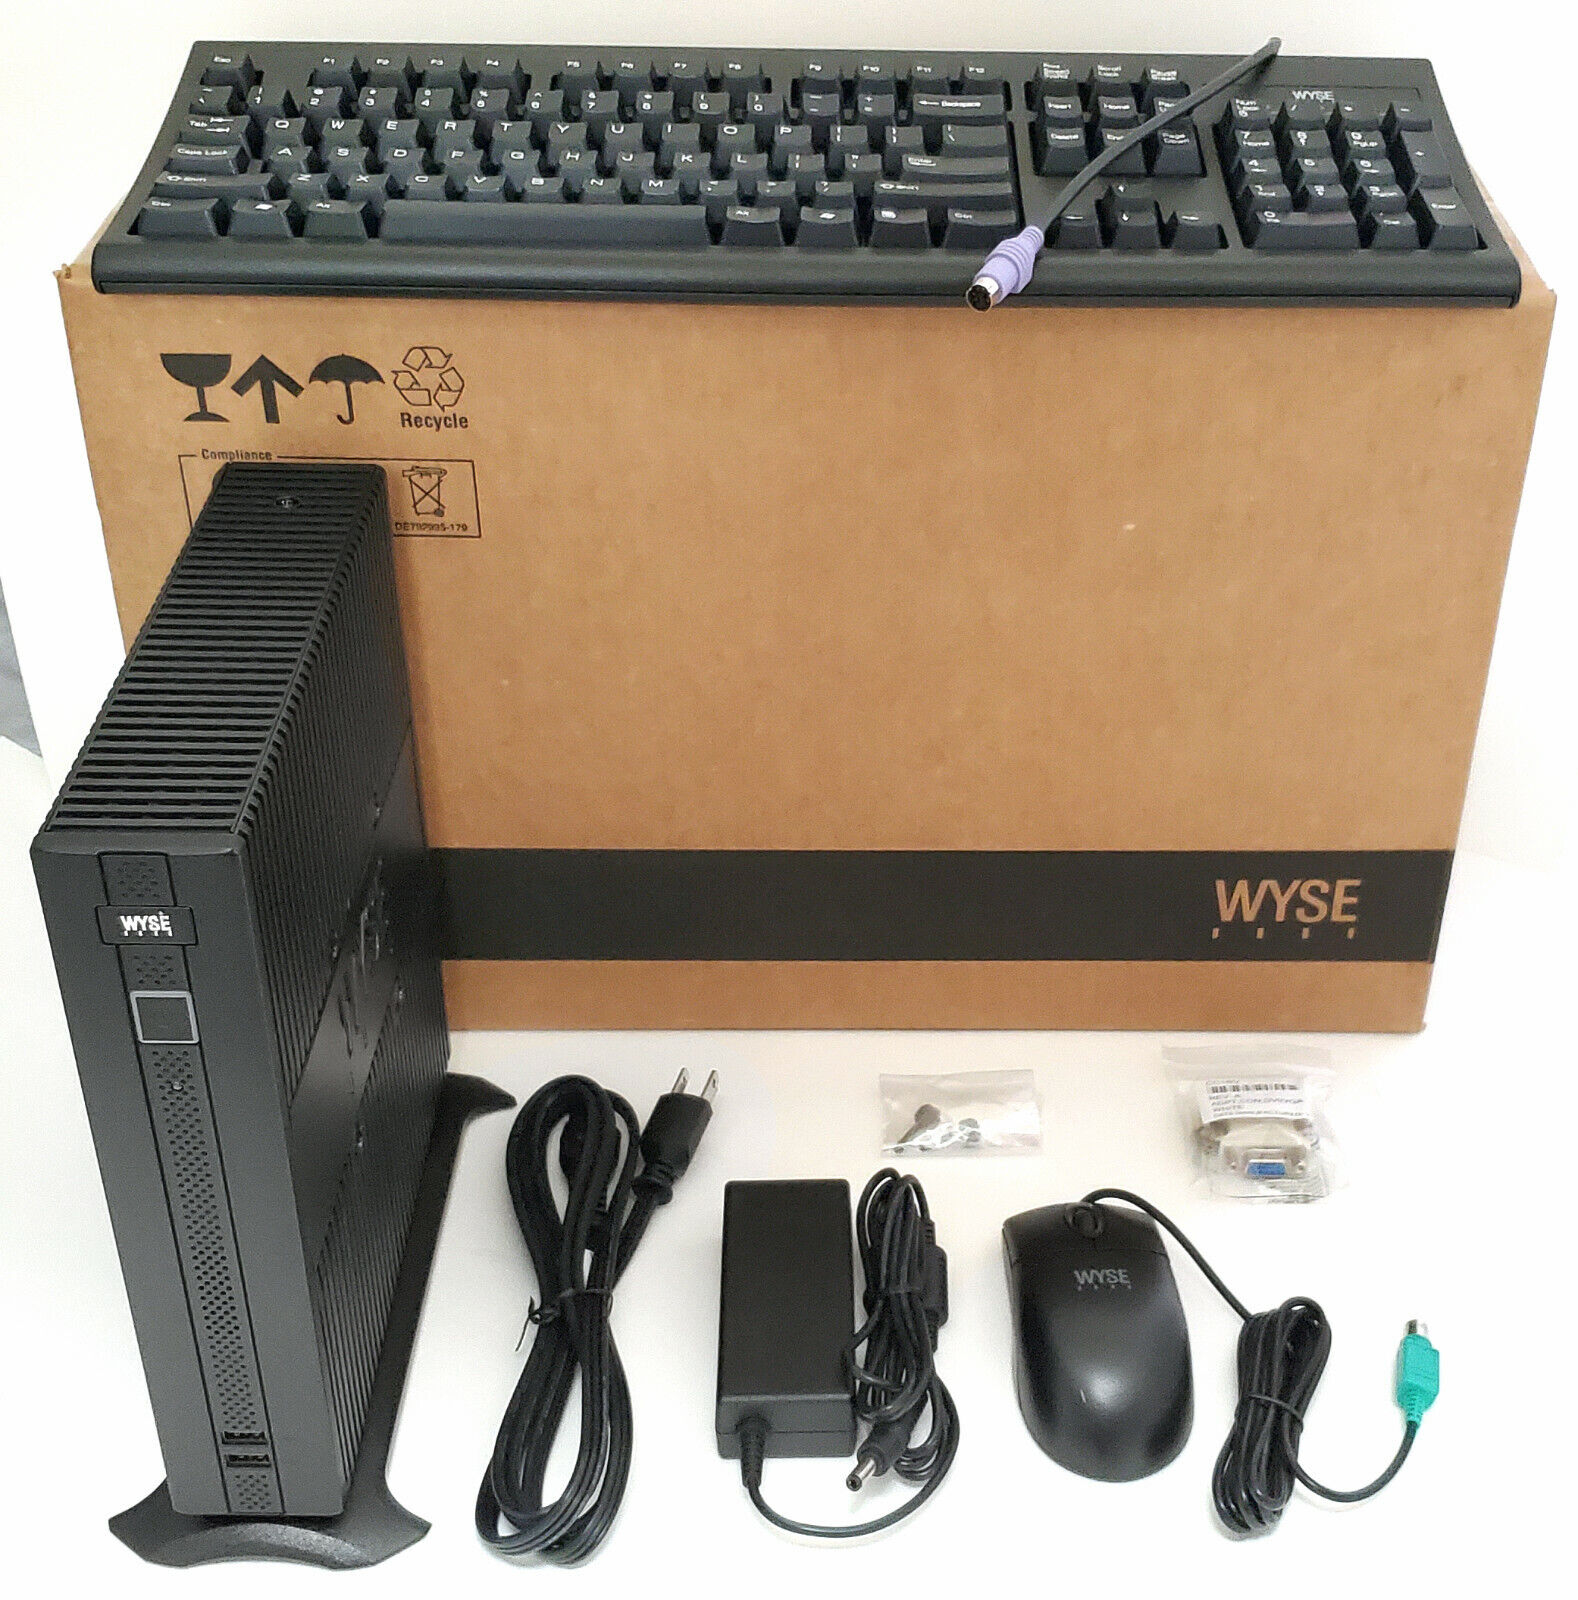 Dell WYSE Xenith Pro Thin Client 909532-01L Rx0L R00LX AMD Sempron 1.5GHz 512MB